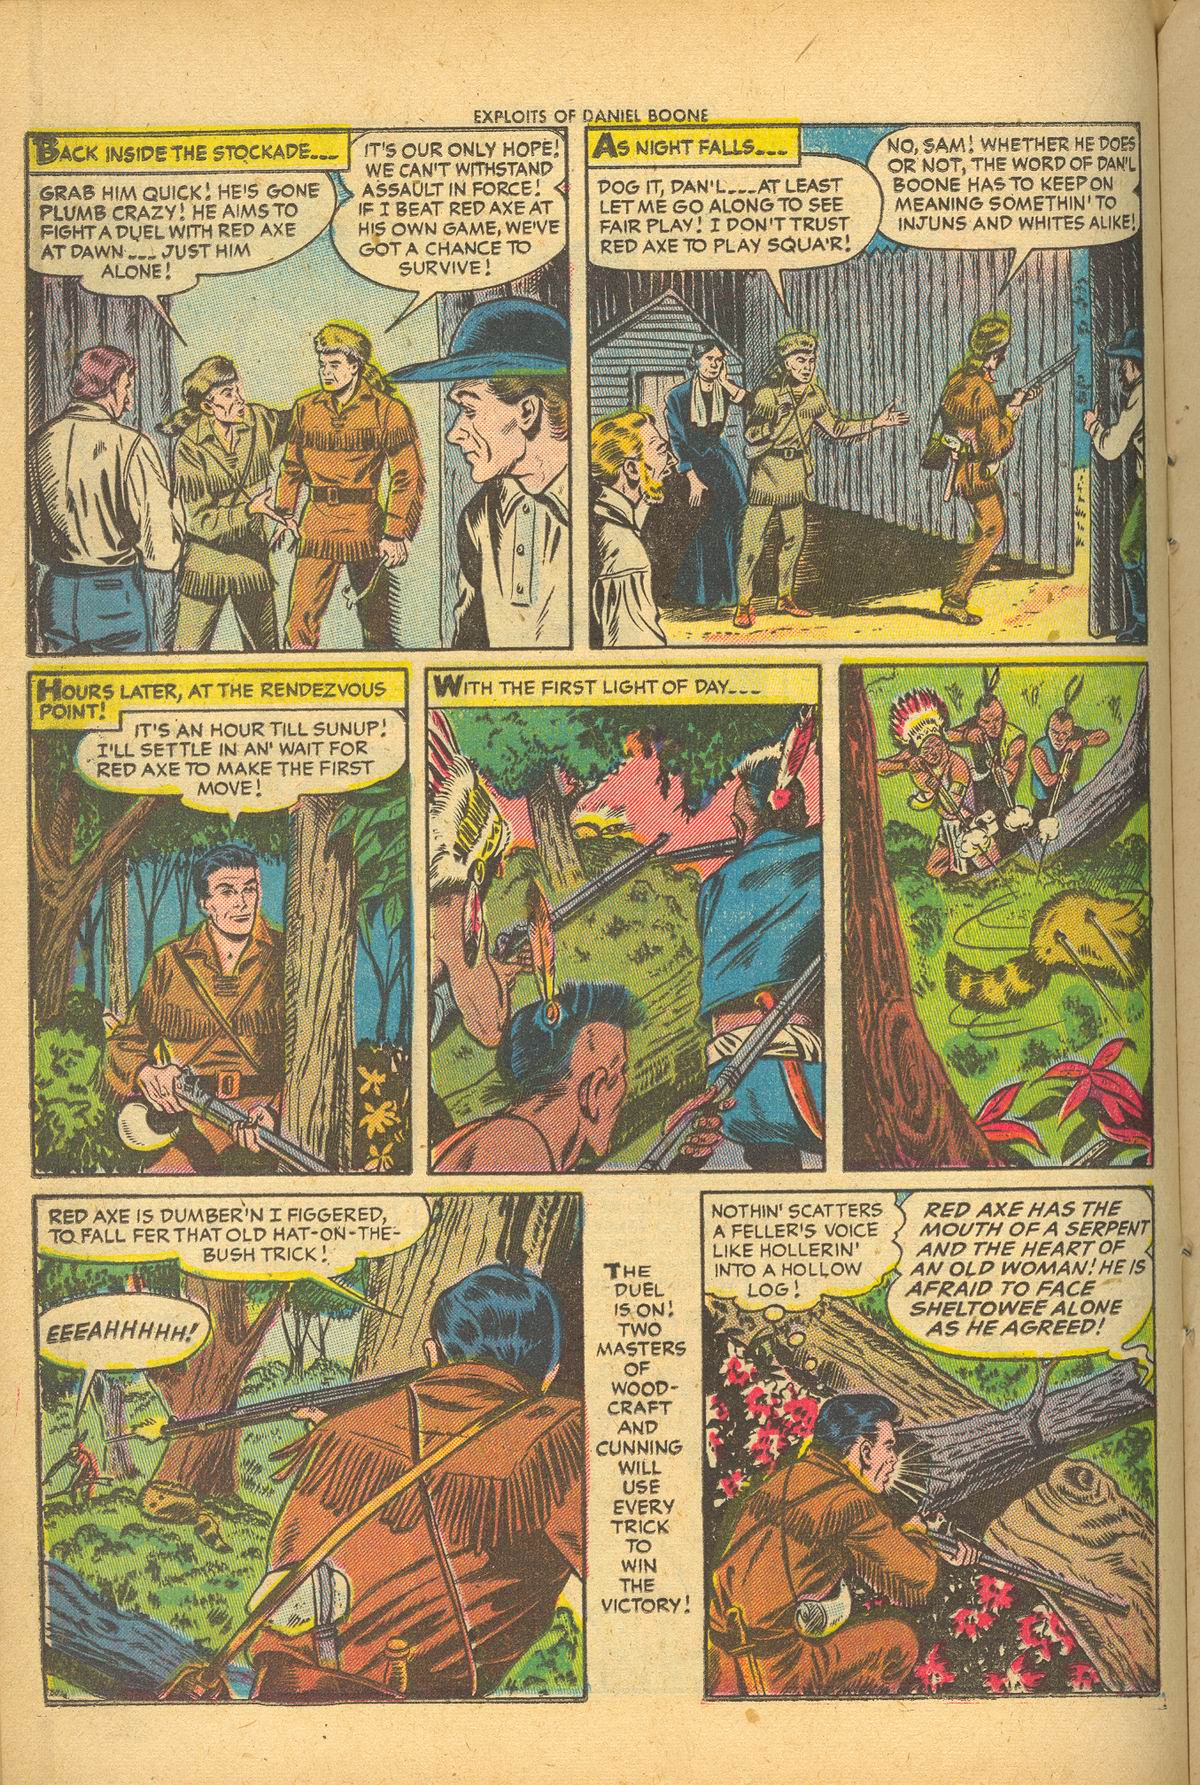 Read online Exploits of Daniel Boone comic -  Issue #2 - 16